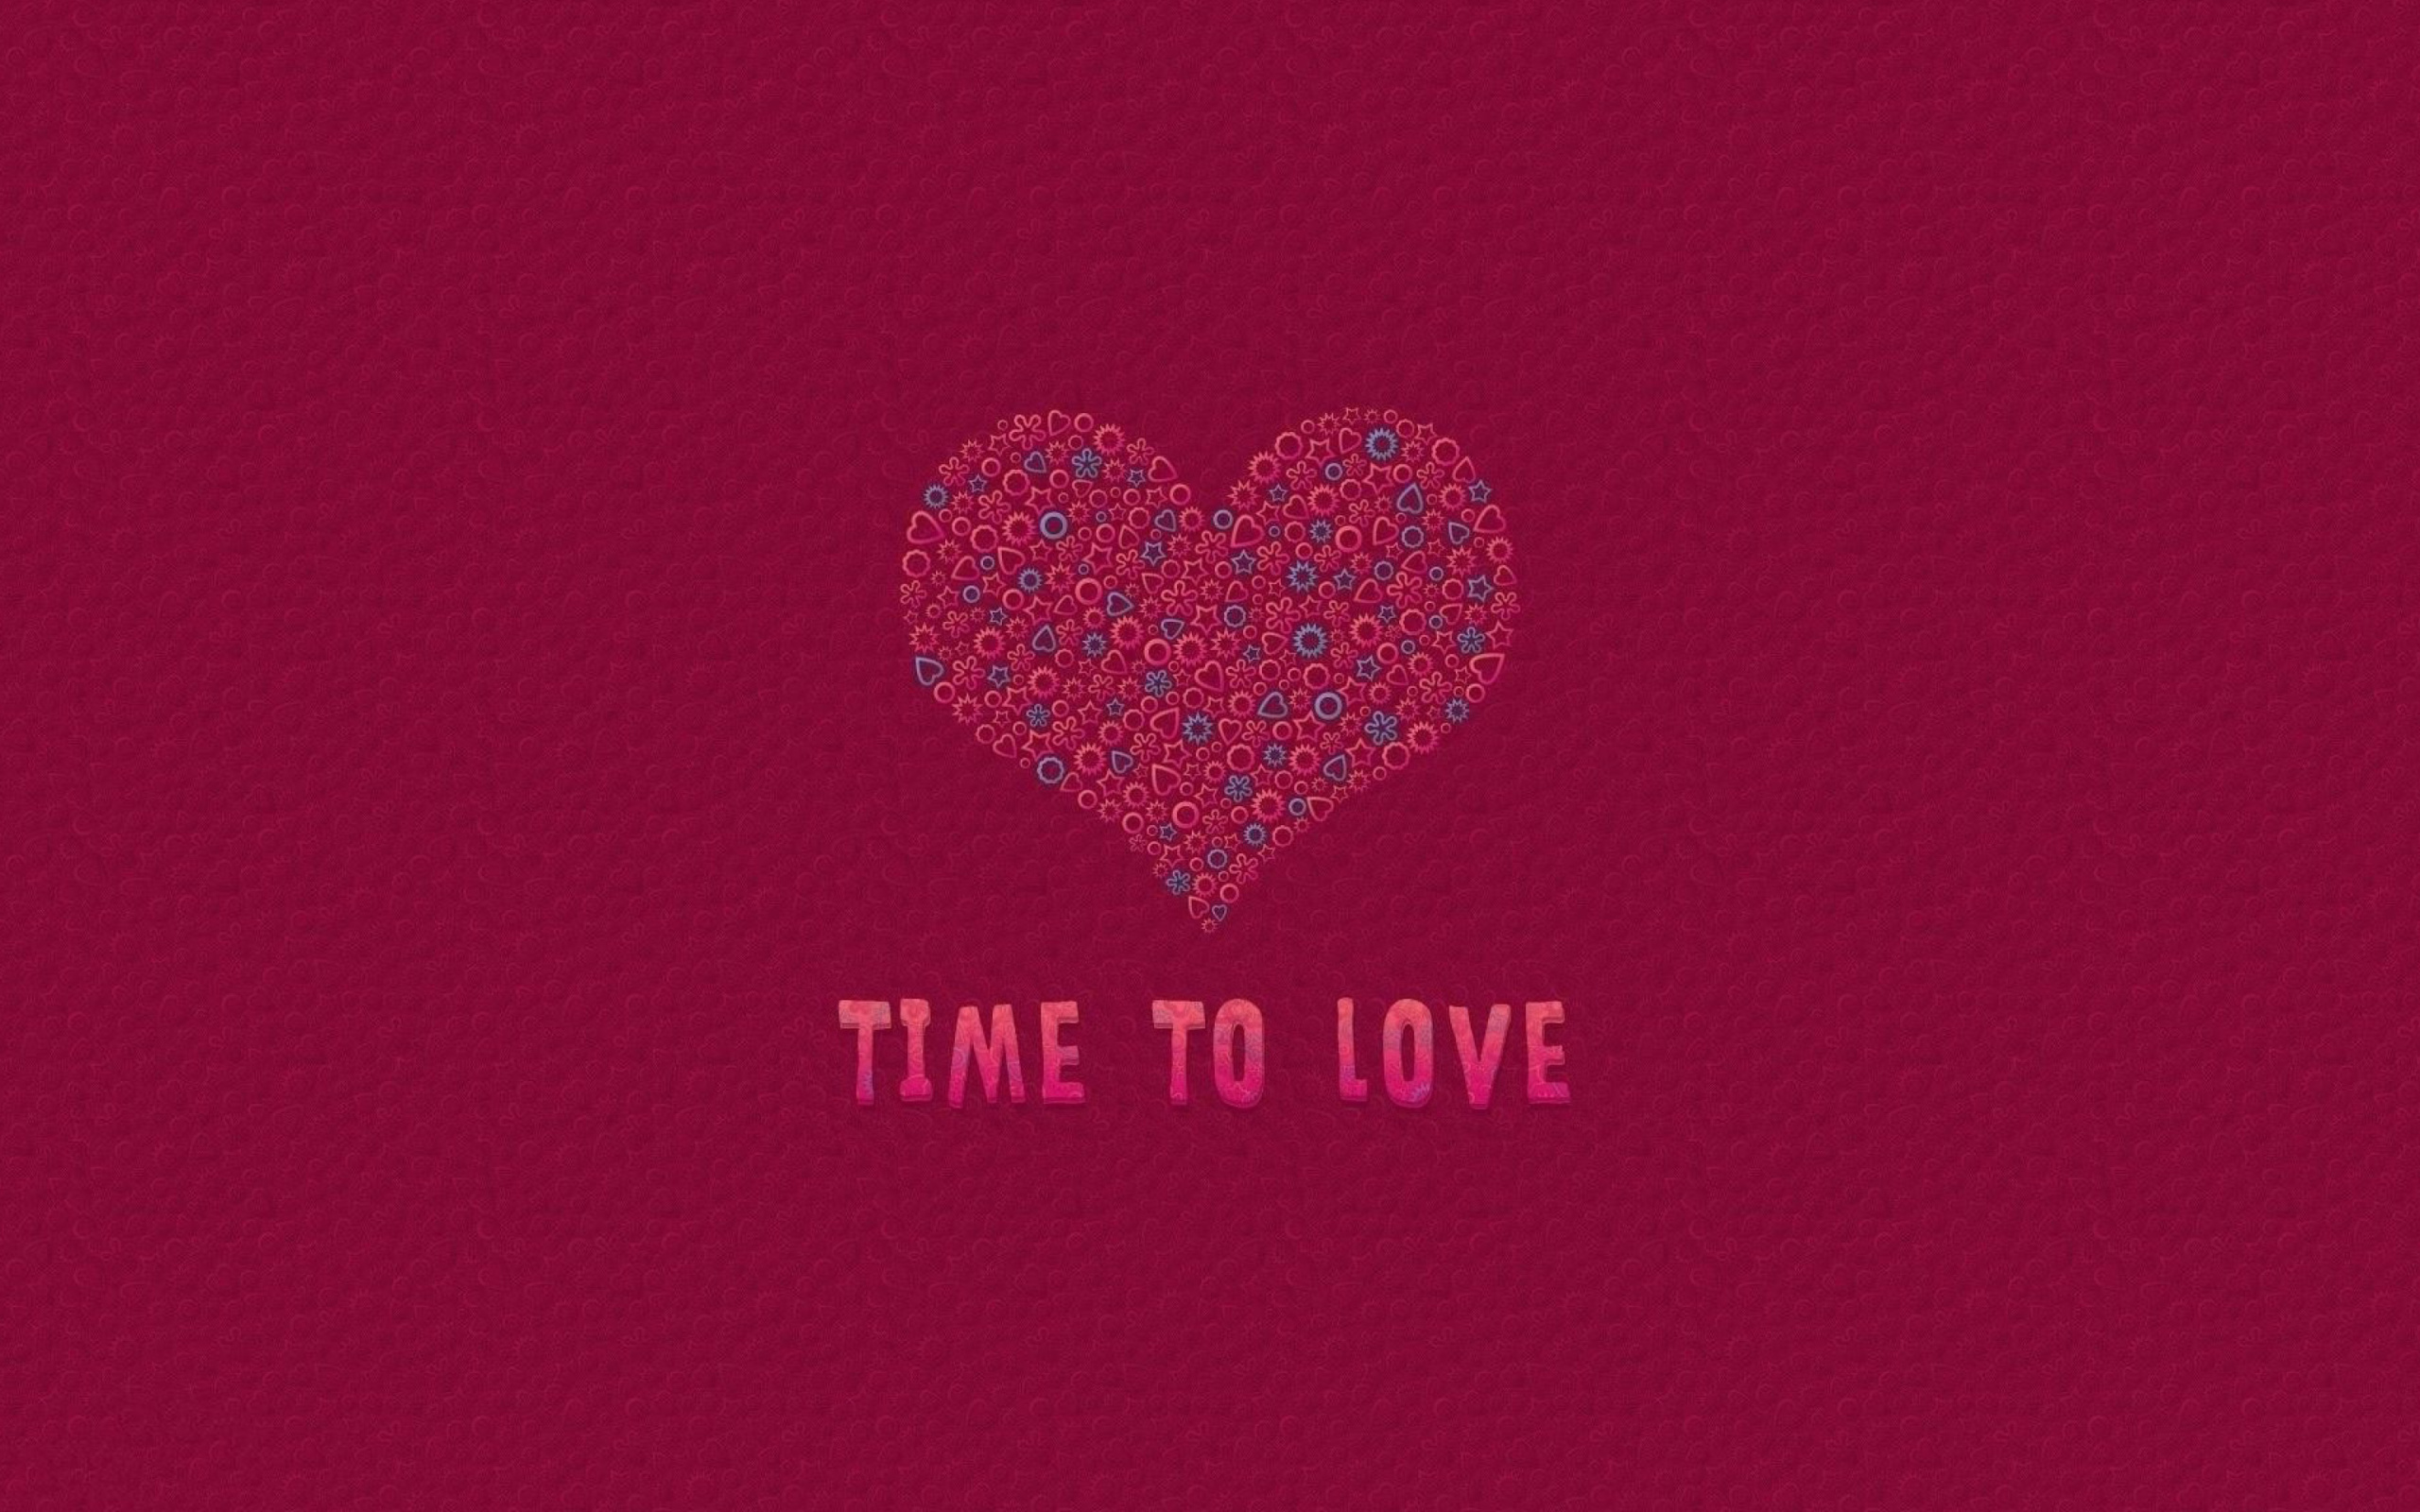 Time to Love wallpaper 2560x1600